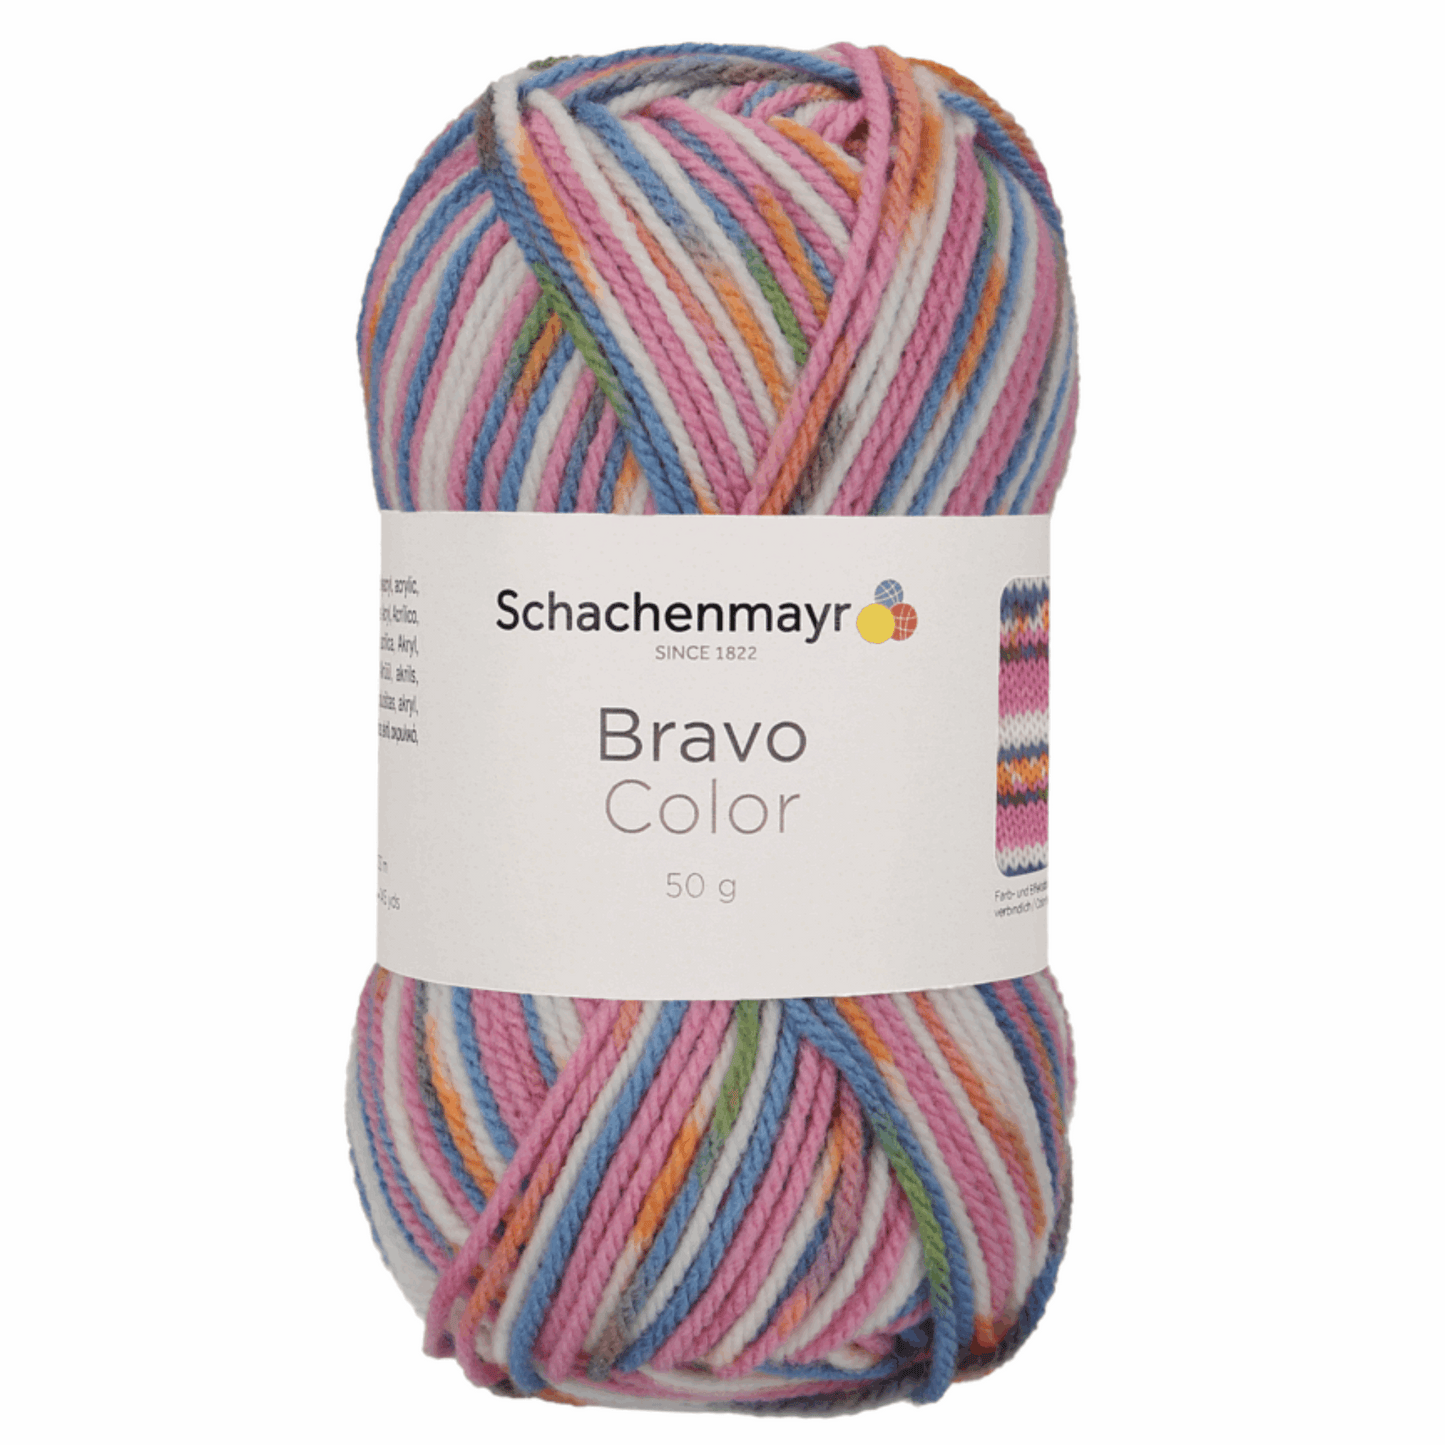 Schachenmayr Bravo Color 50g, 90421, Farbe Candy Color 2117